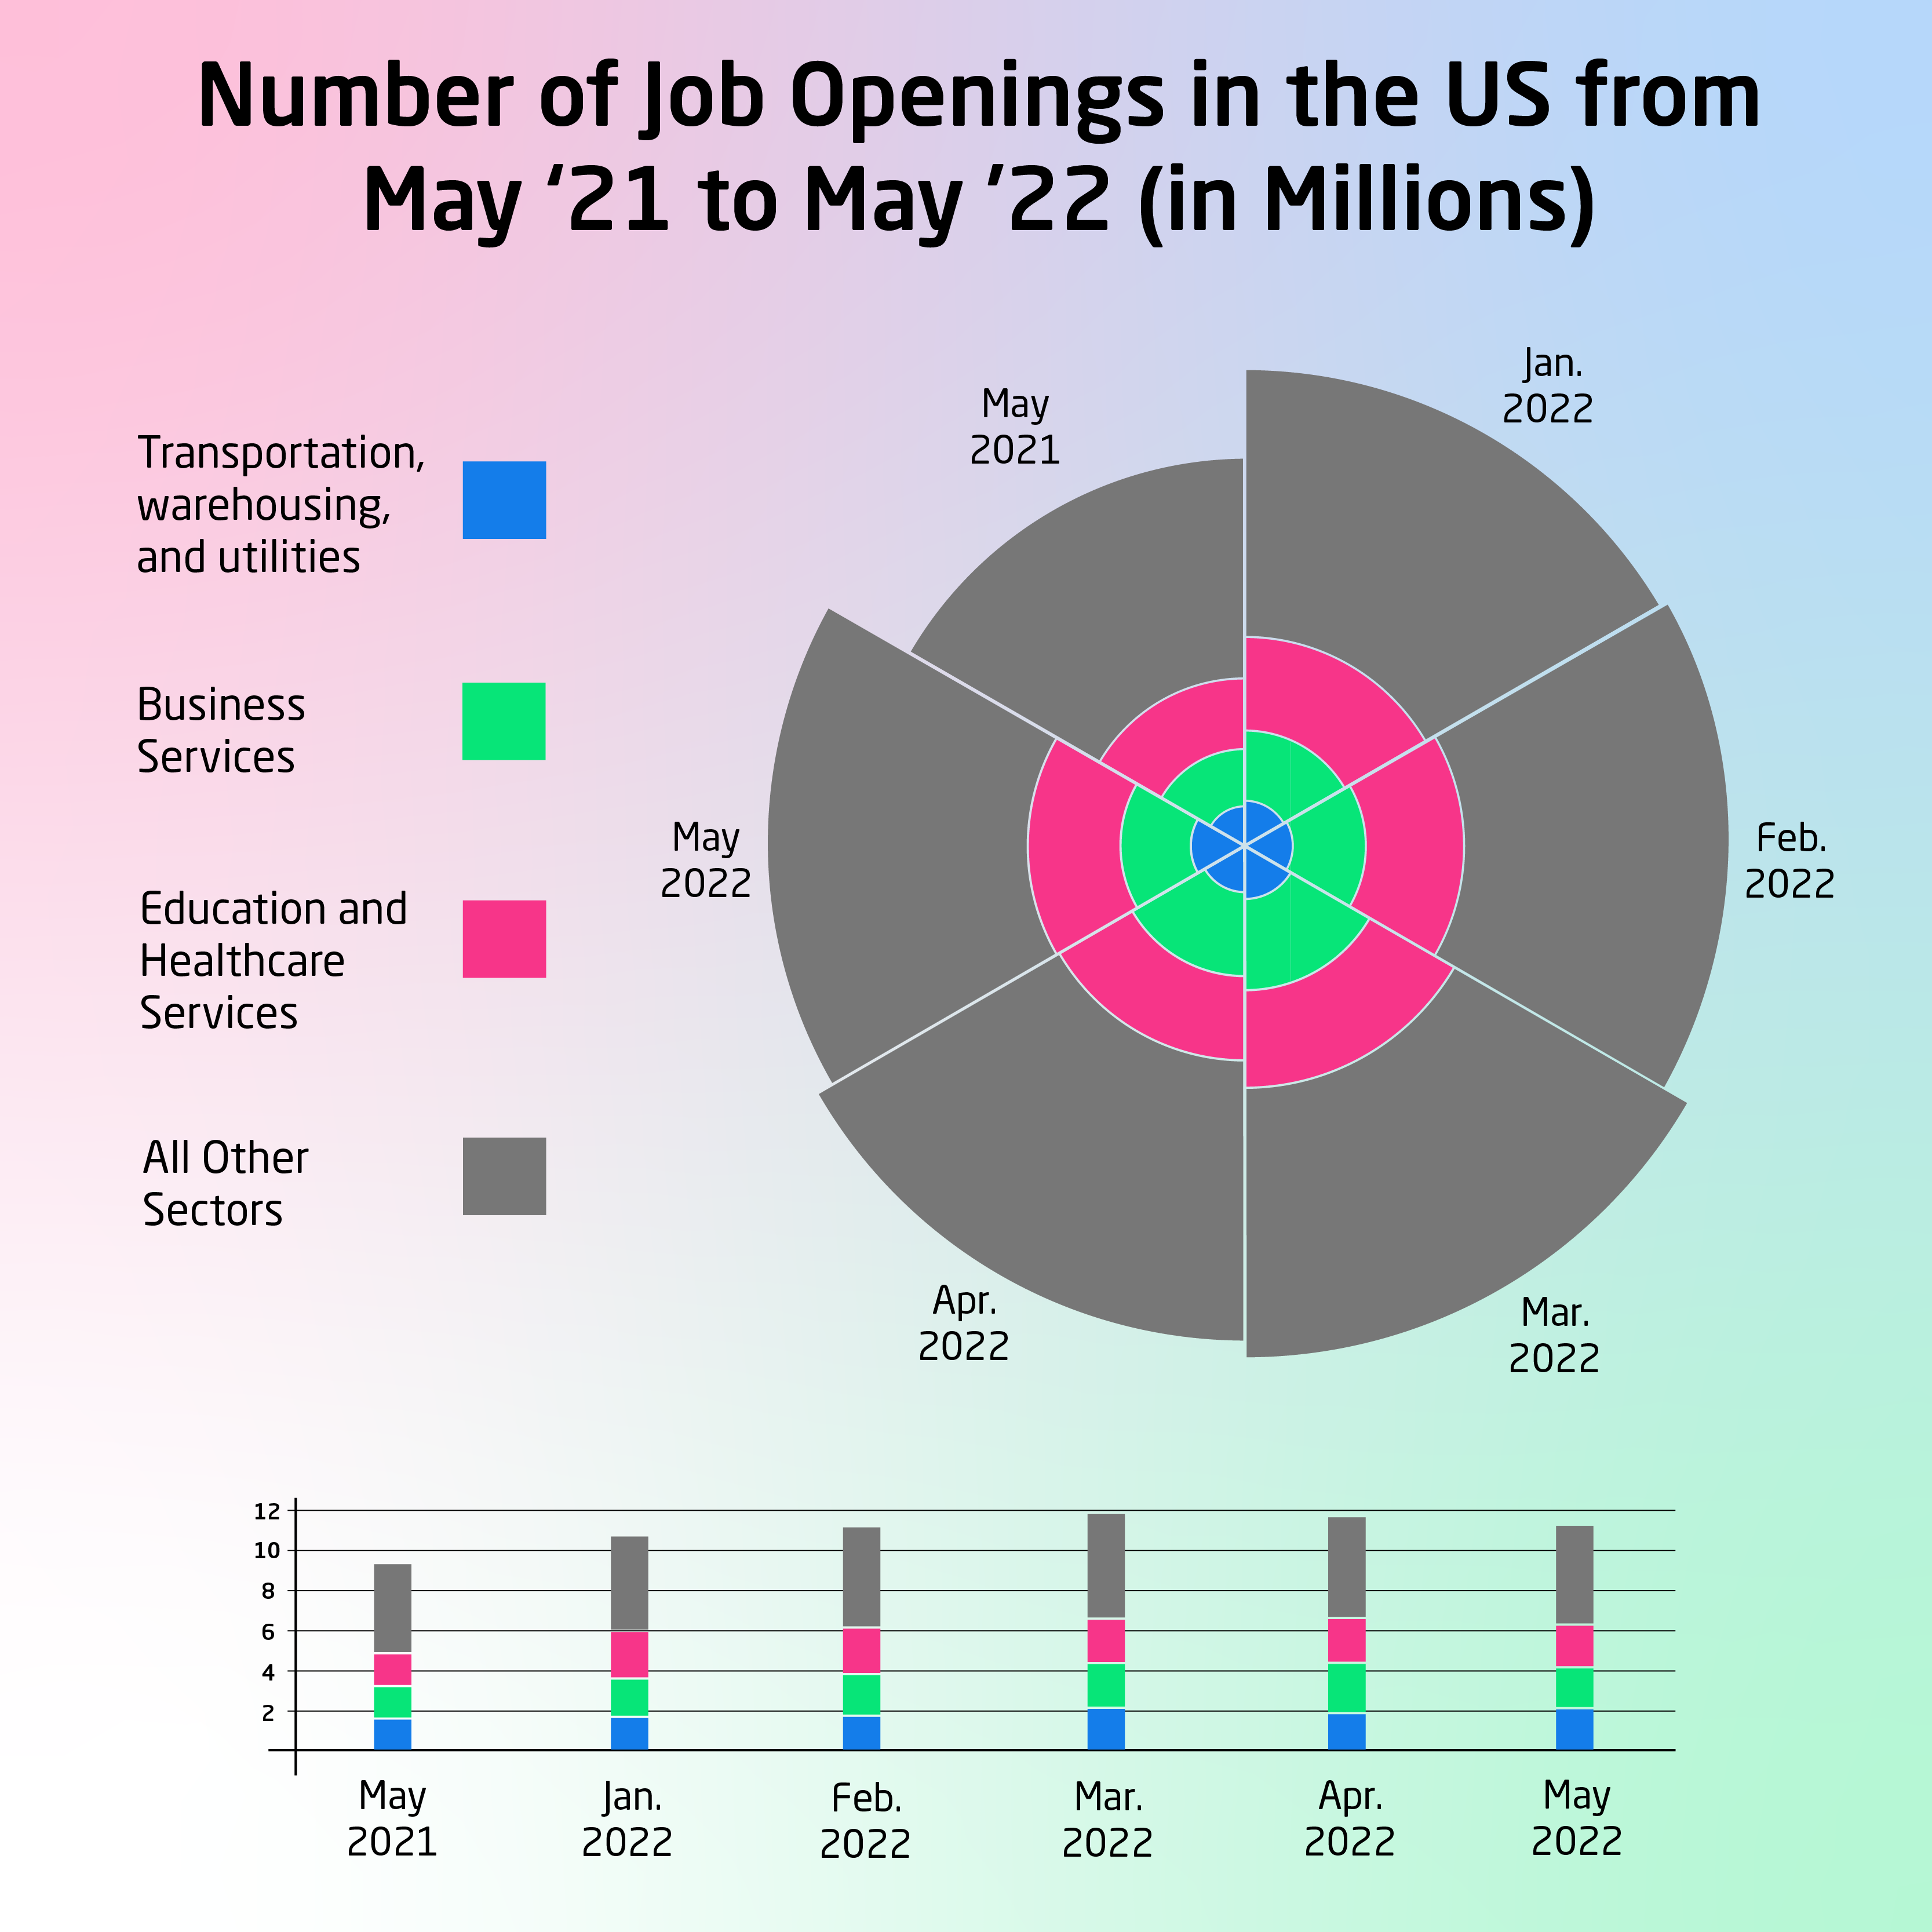 Infographic showing the number of job openings in the US from May 2021 through May 2022